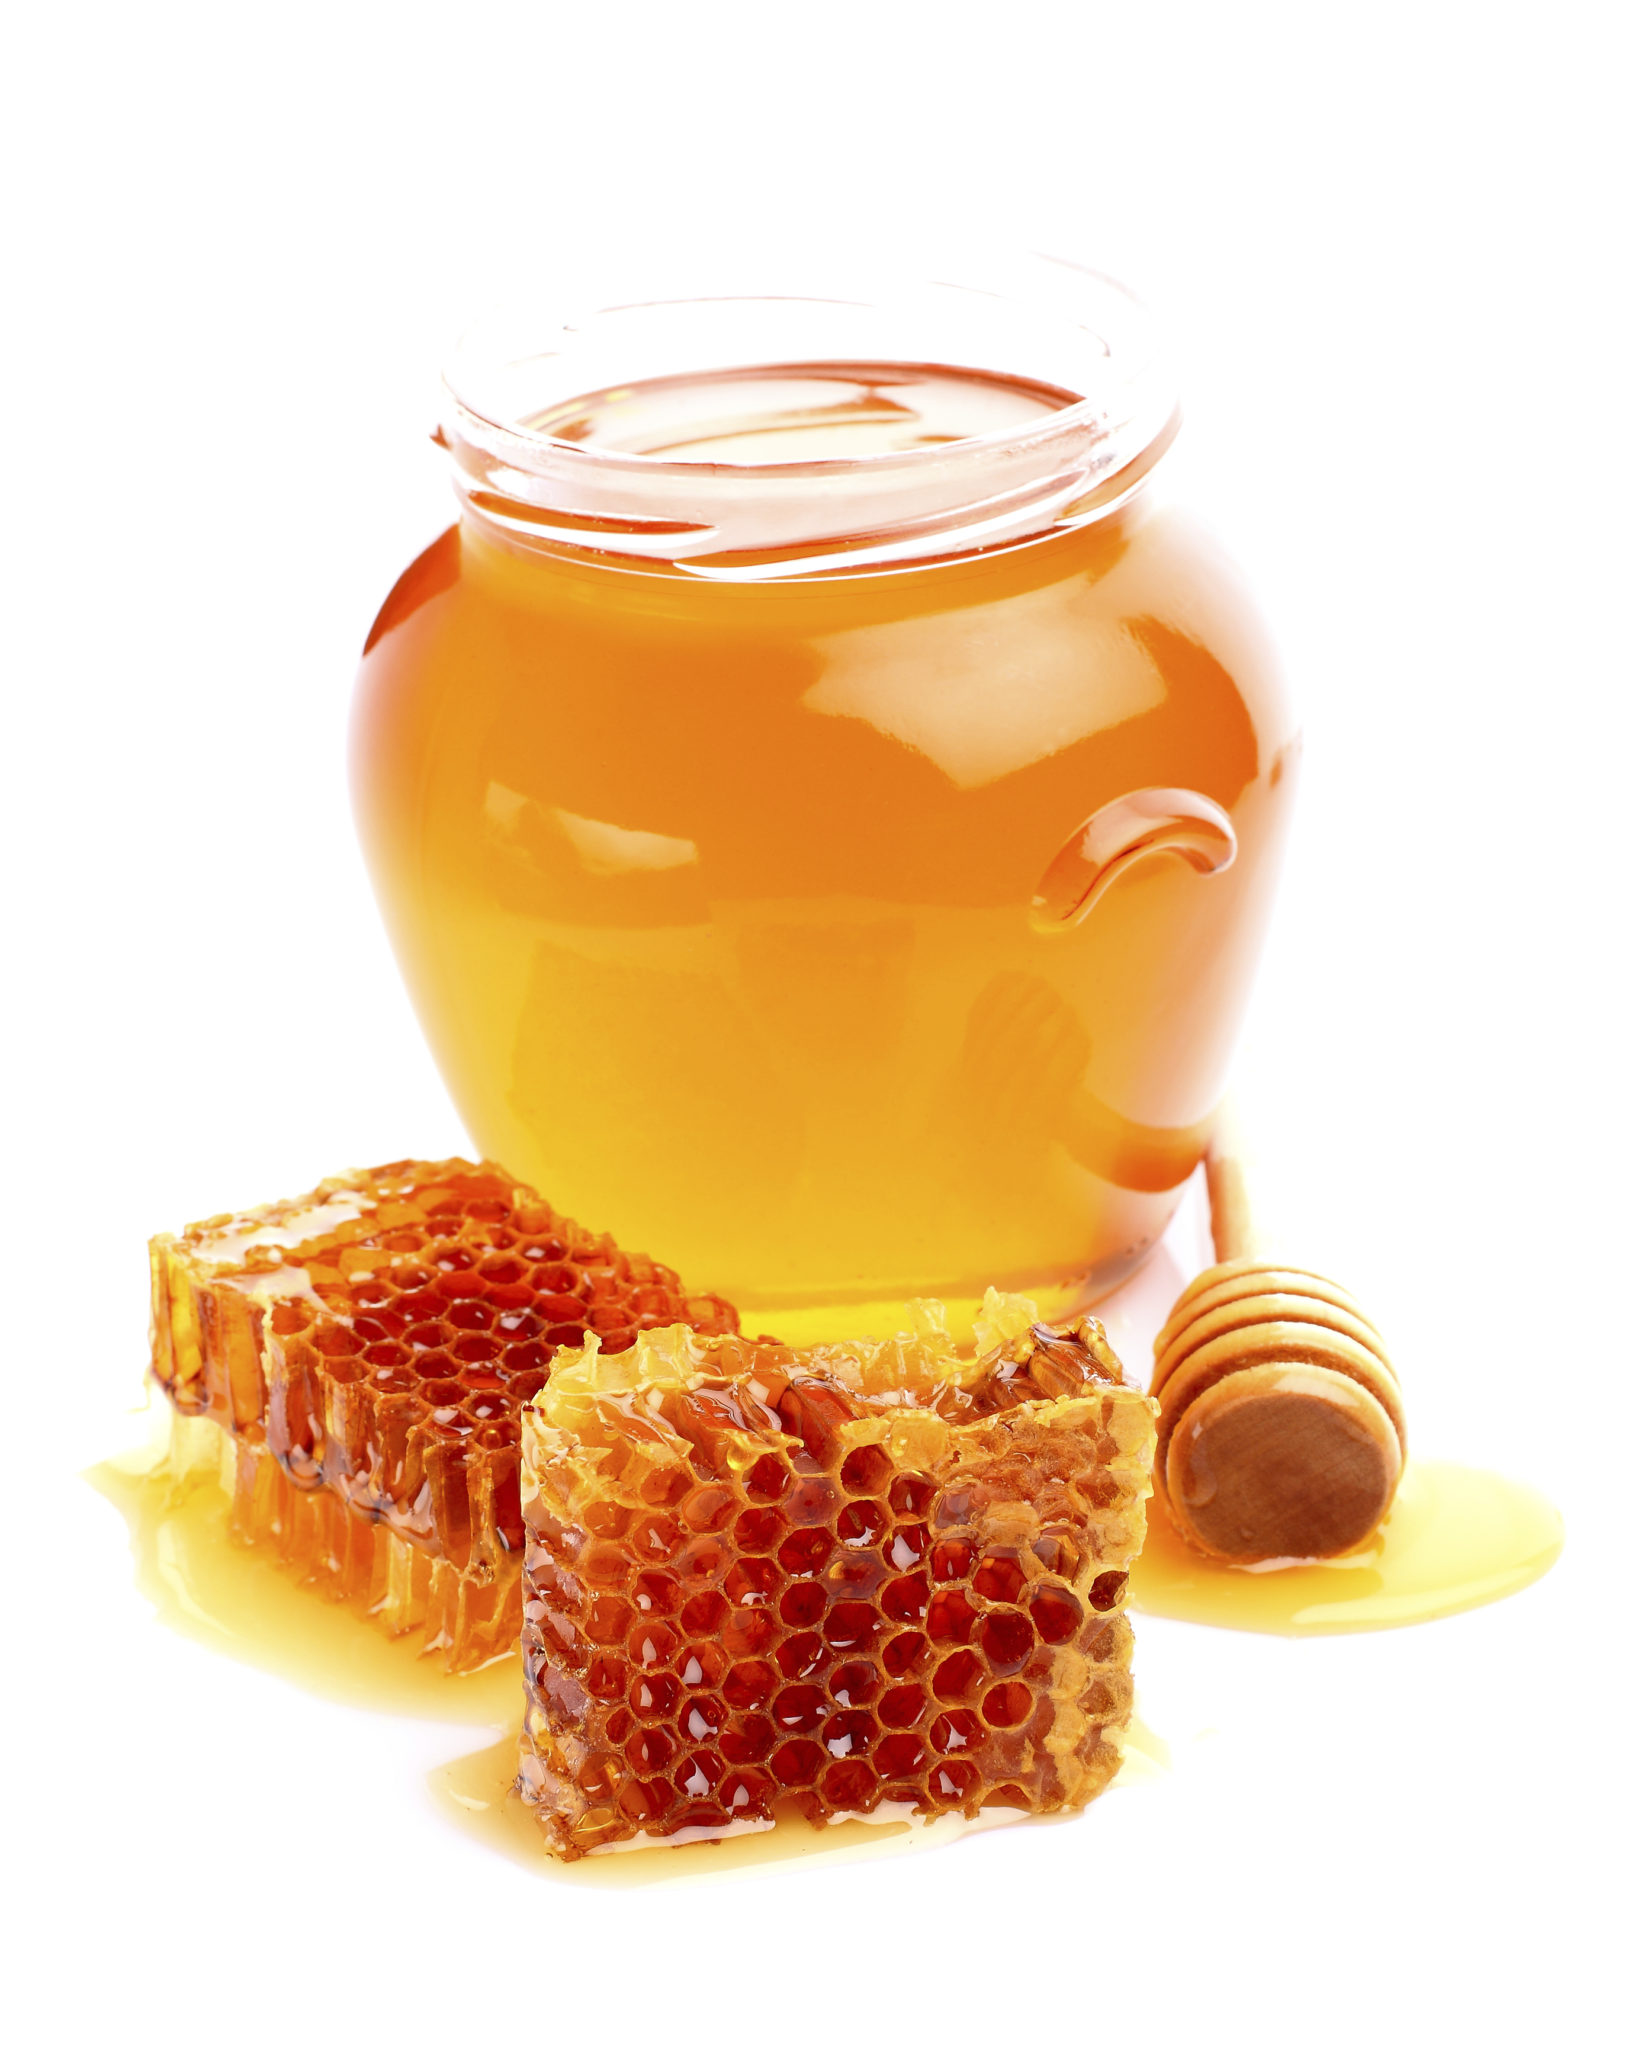 Honey-Beauty Product from your Kitchen